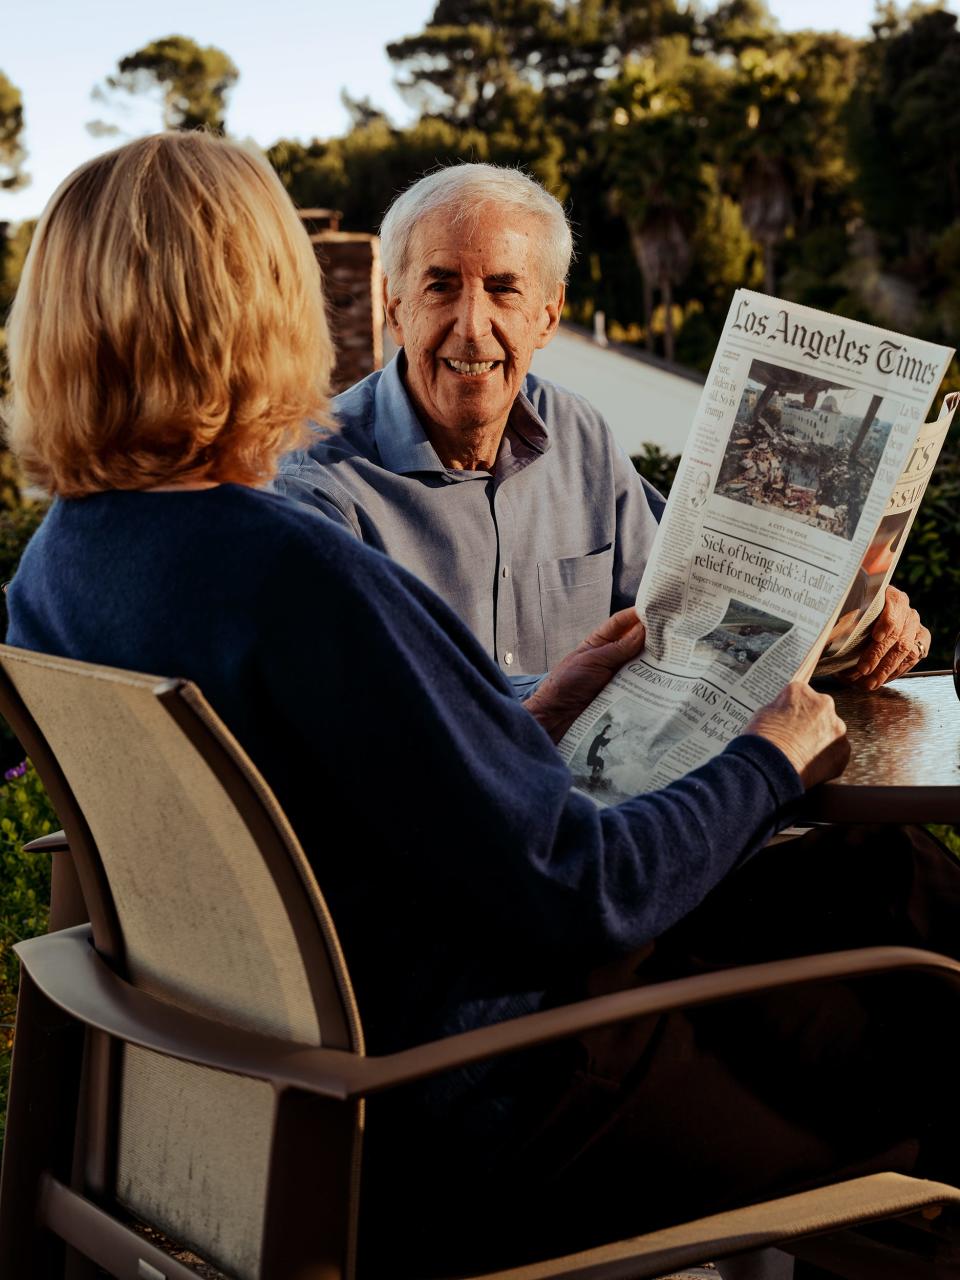 Man smiling at his wife as they both sit outside reading newspapers